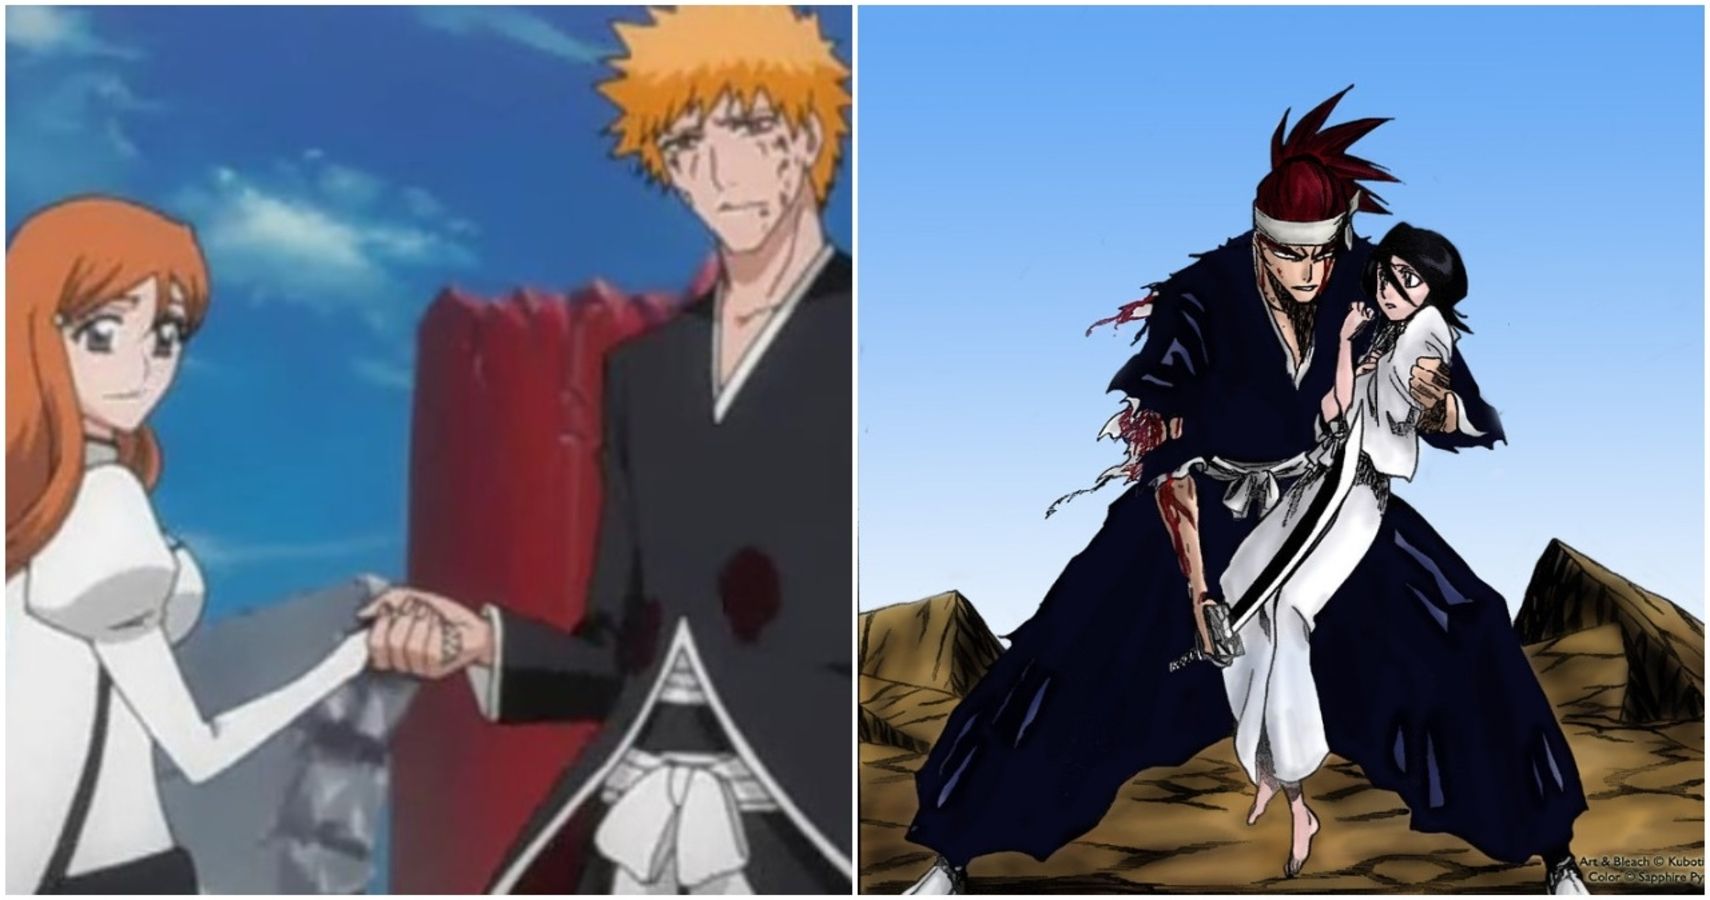 there was only ever one love story in Bleach, and it's already